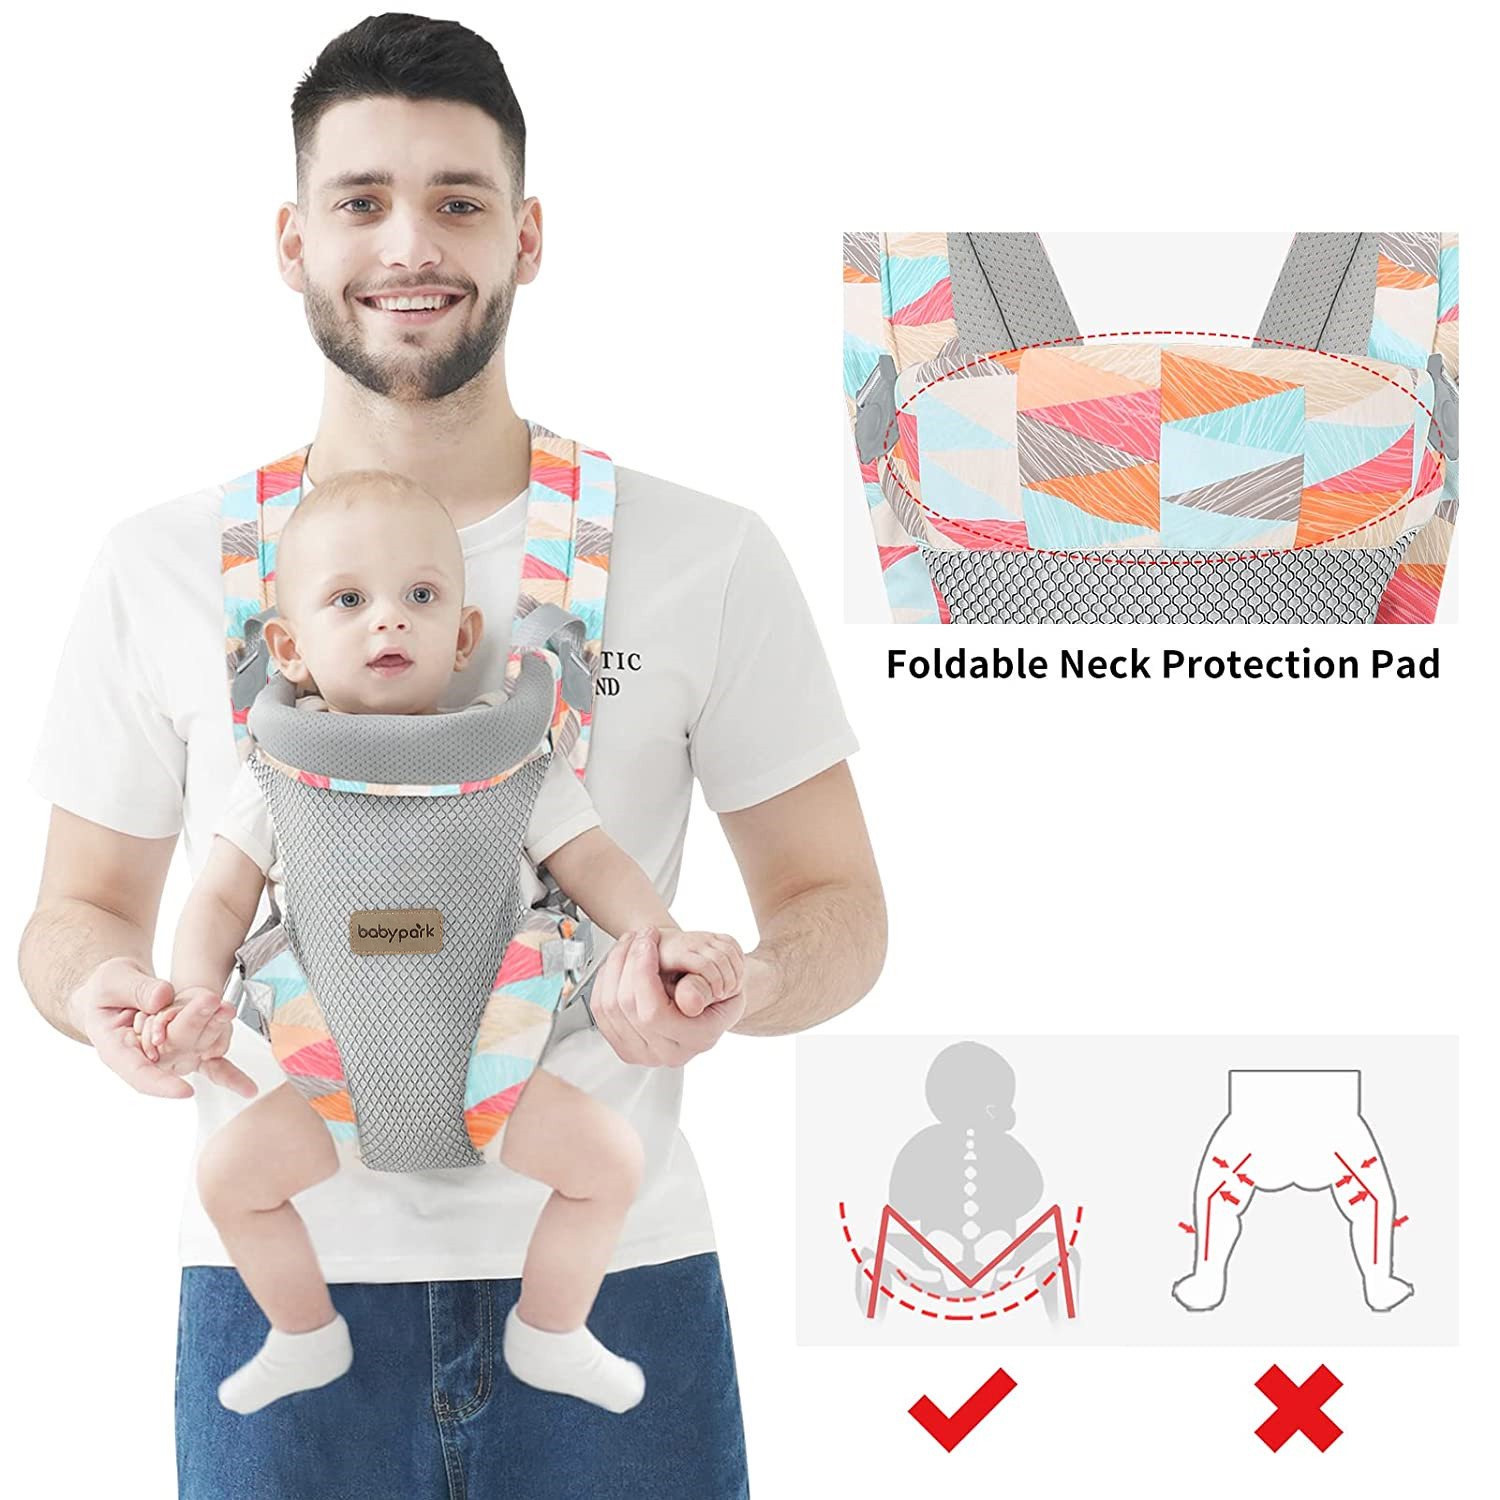 Yadala Baby Carrier, 4-in-1 Colorful Baby Carrier, Front and Back Baby Sling with Adjustable Holder - image 4 of 8